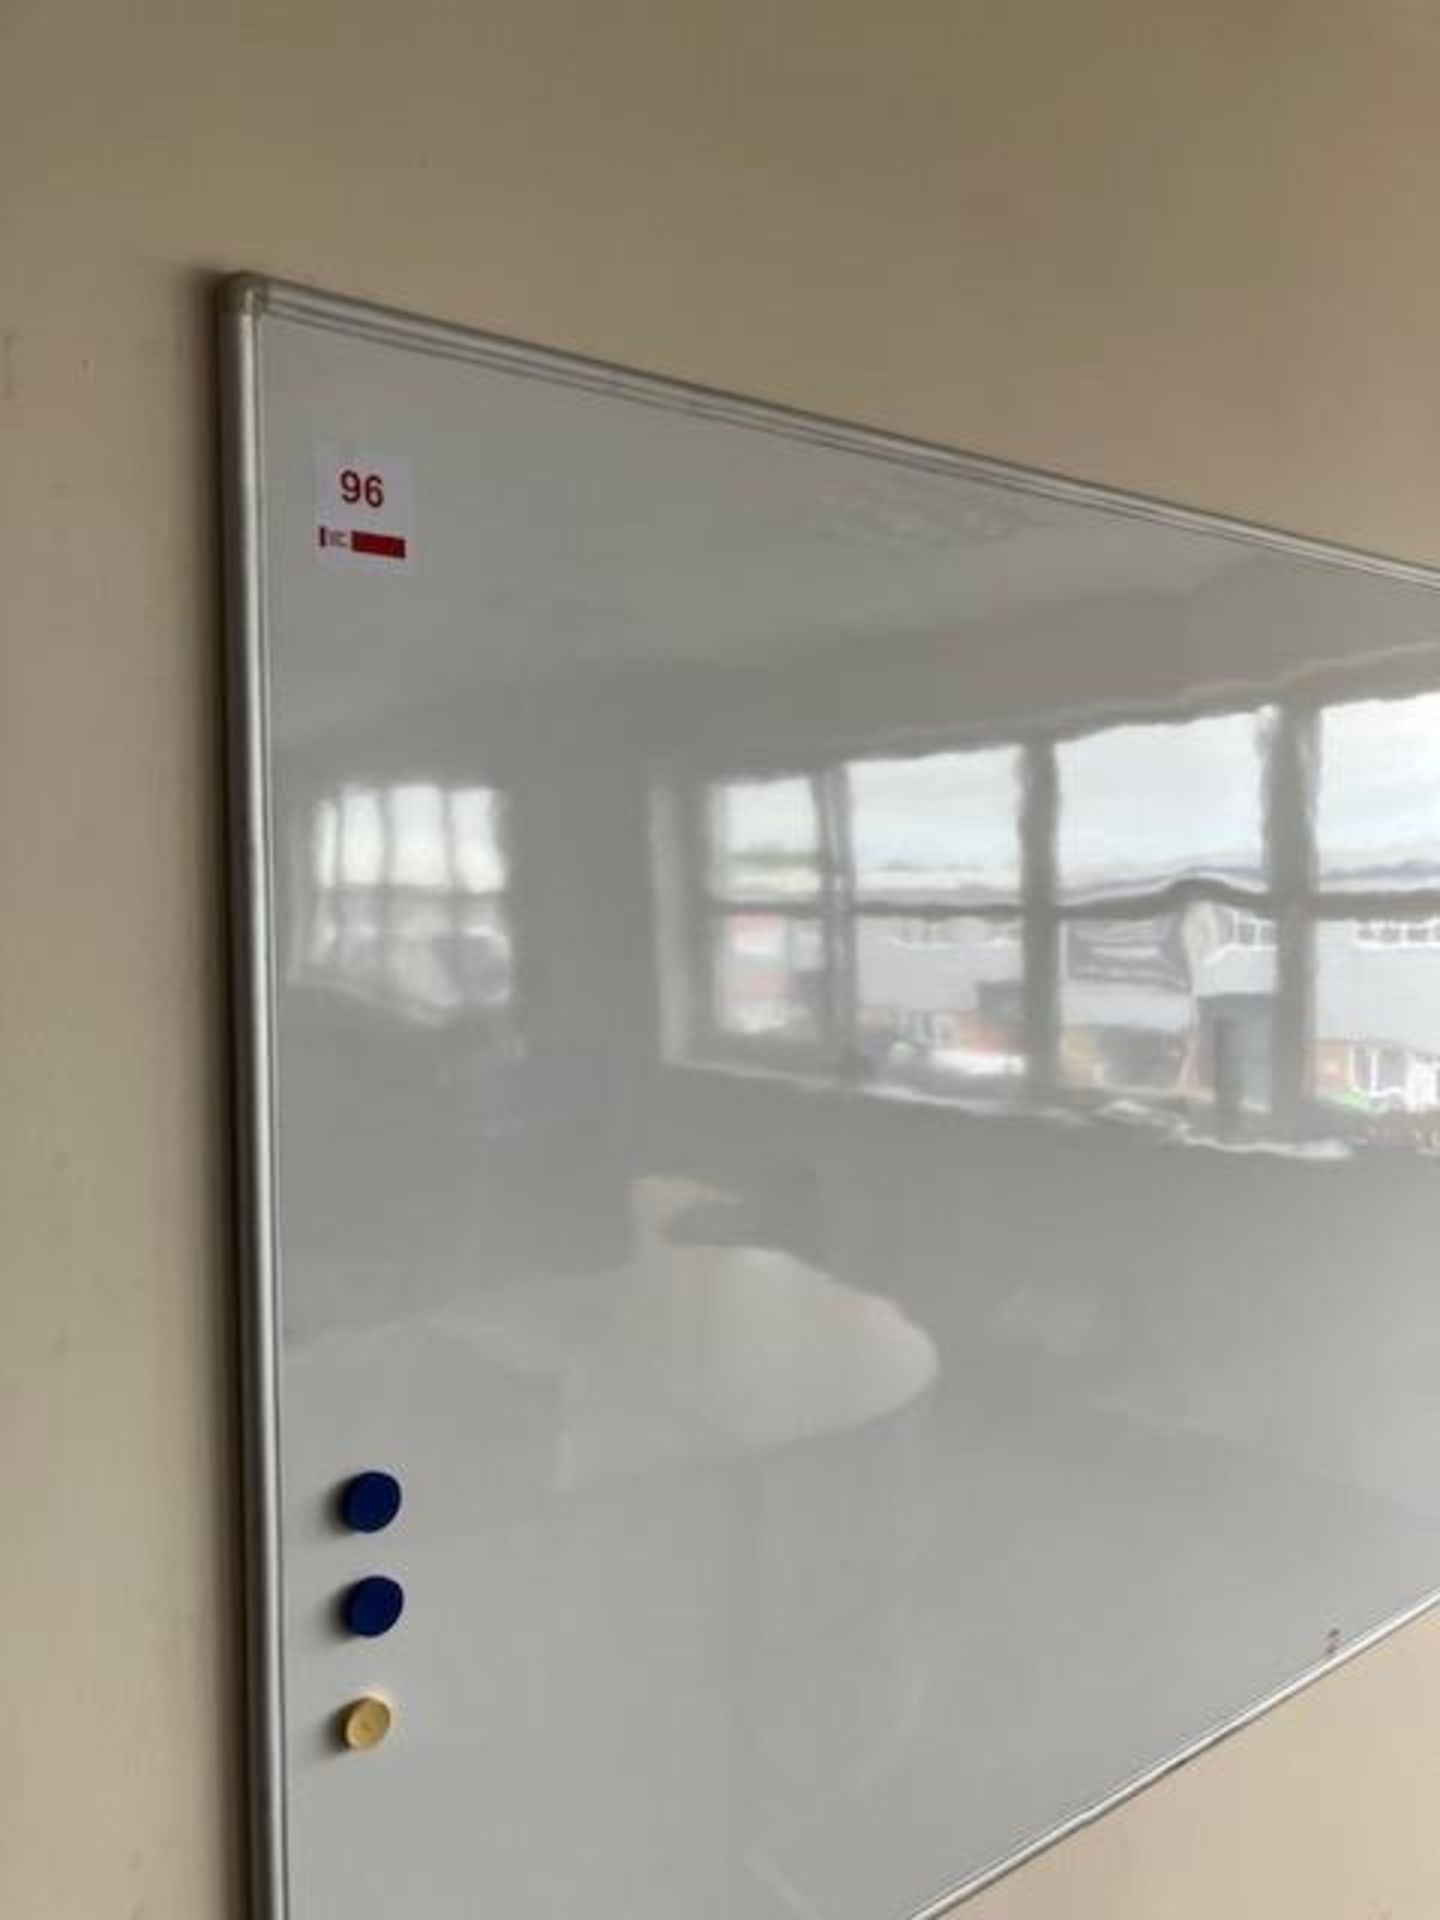 Six whiteboards, approx 1.8 x 1.2m, two whiteboards approx 1.2 x 800m